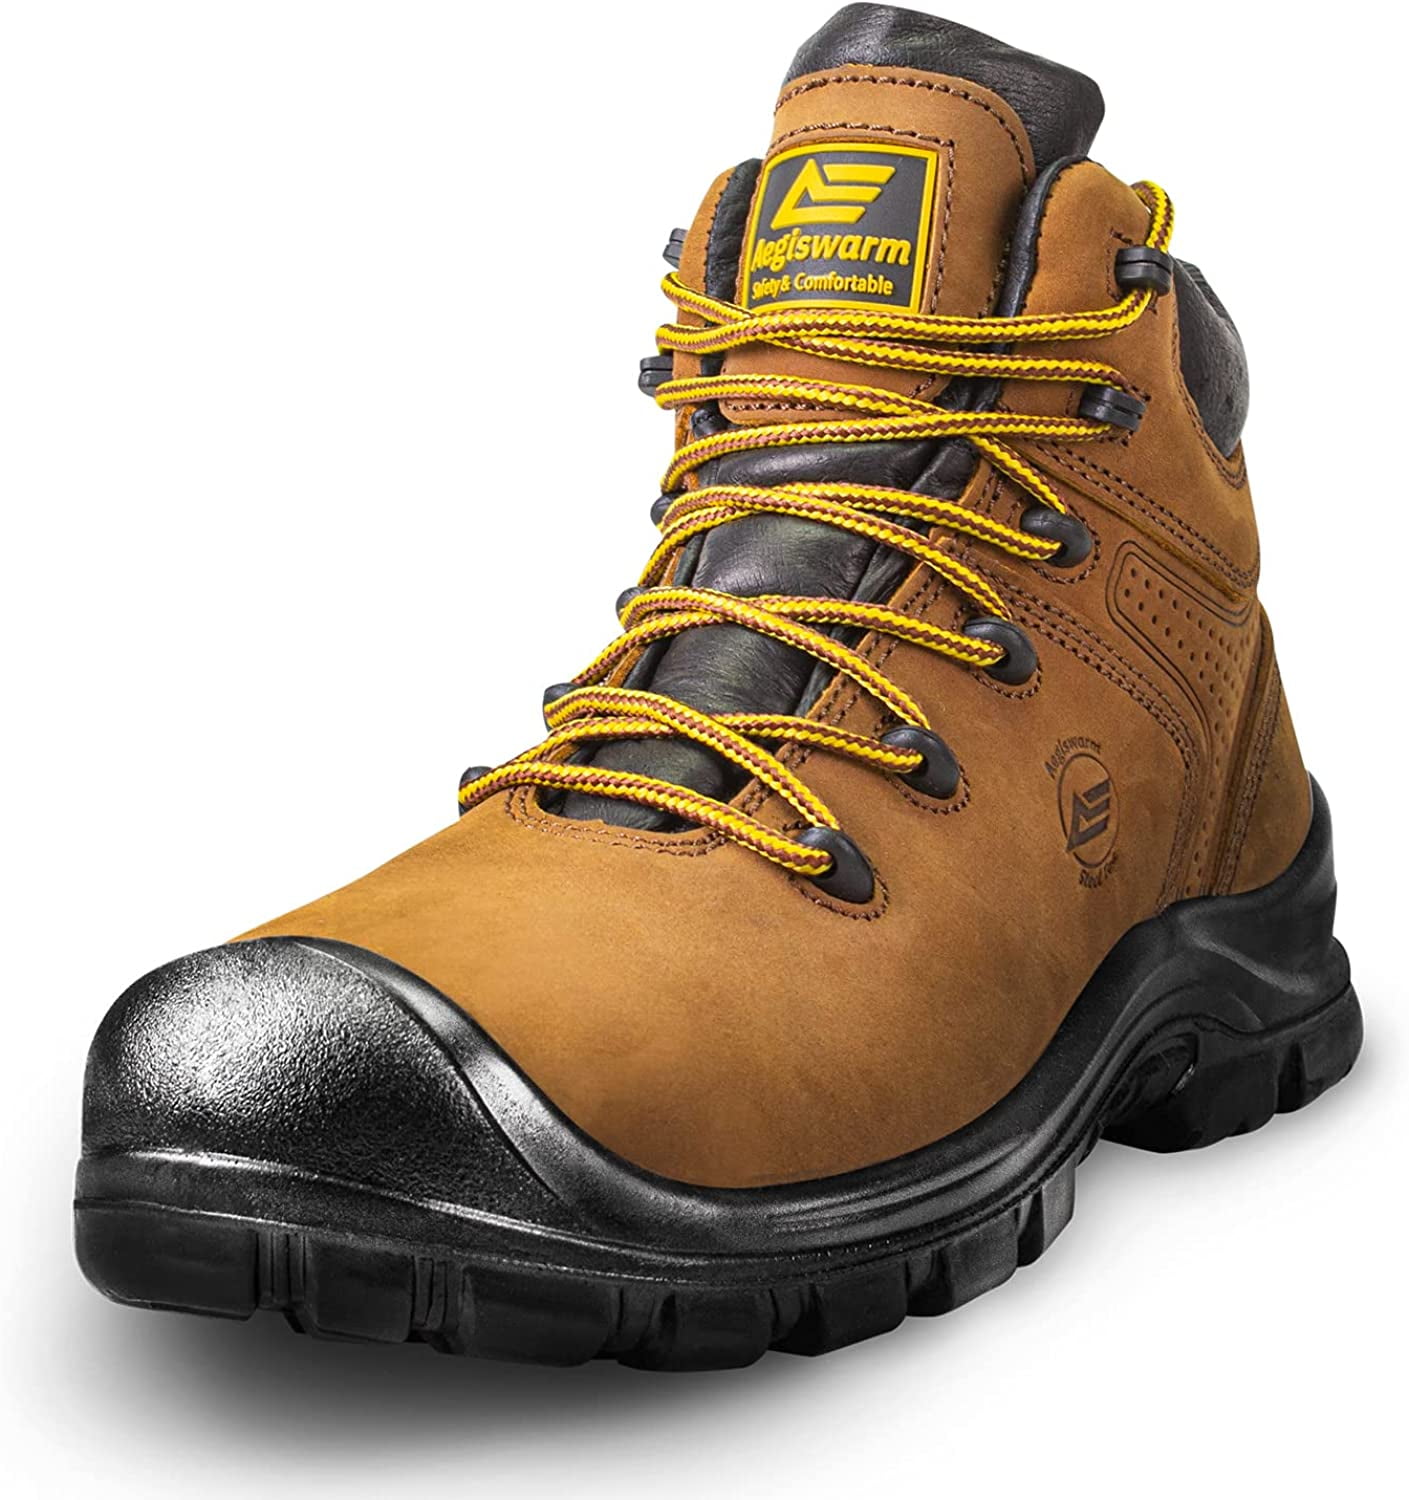 Womens Safety Work Shoes Steel Toe Cap Outdoor Hiking Leather Boots Casual 3-11 